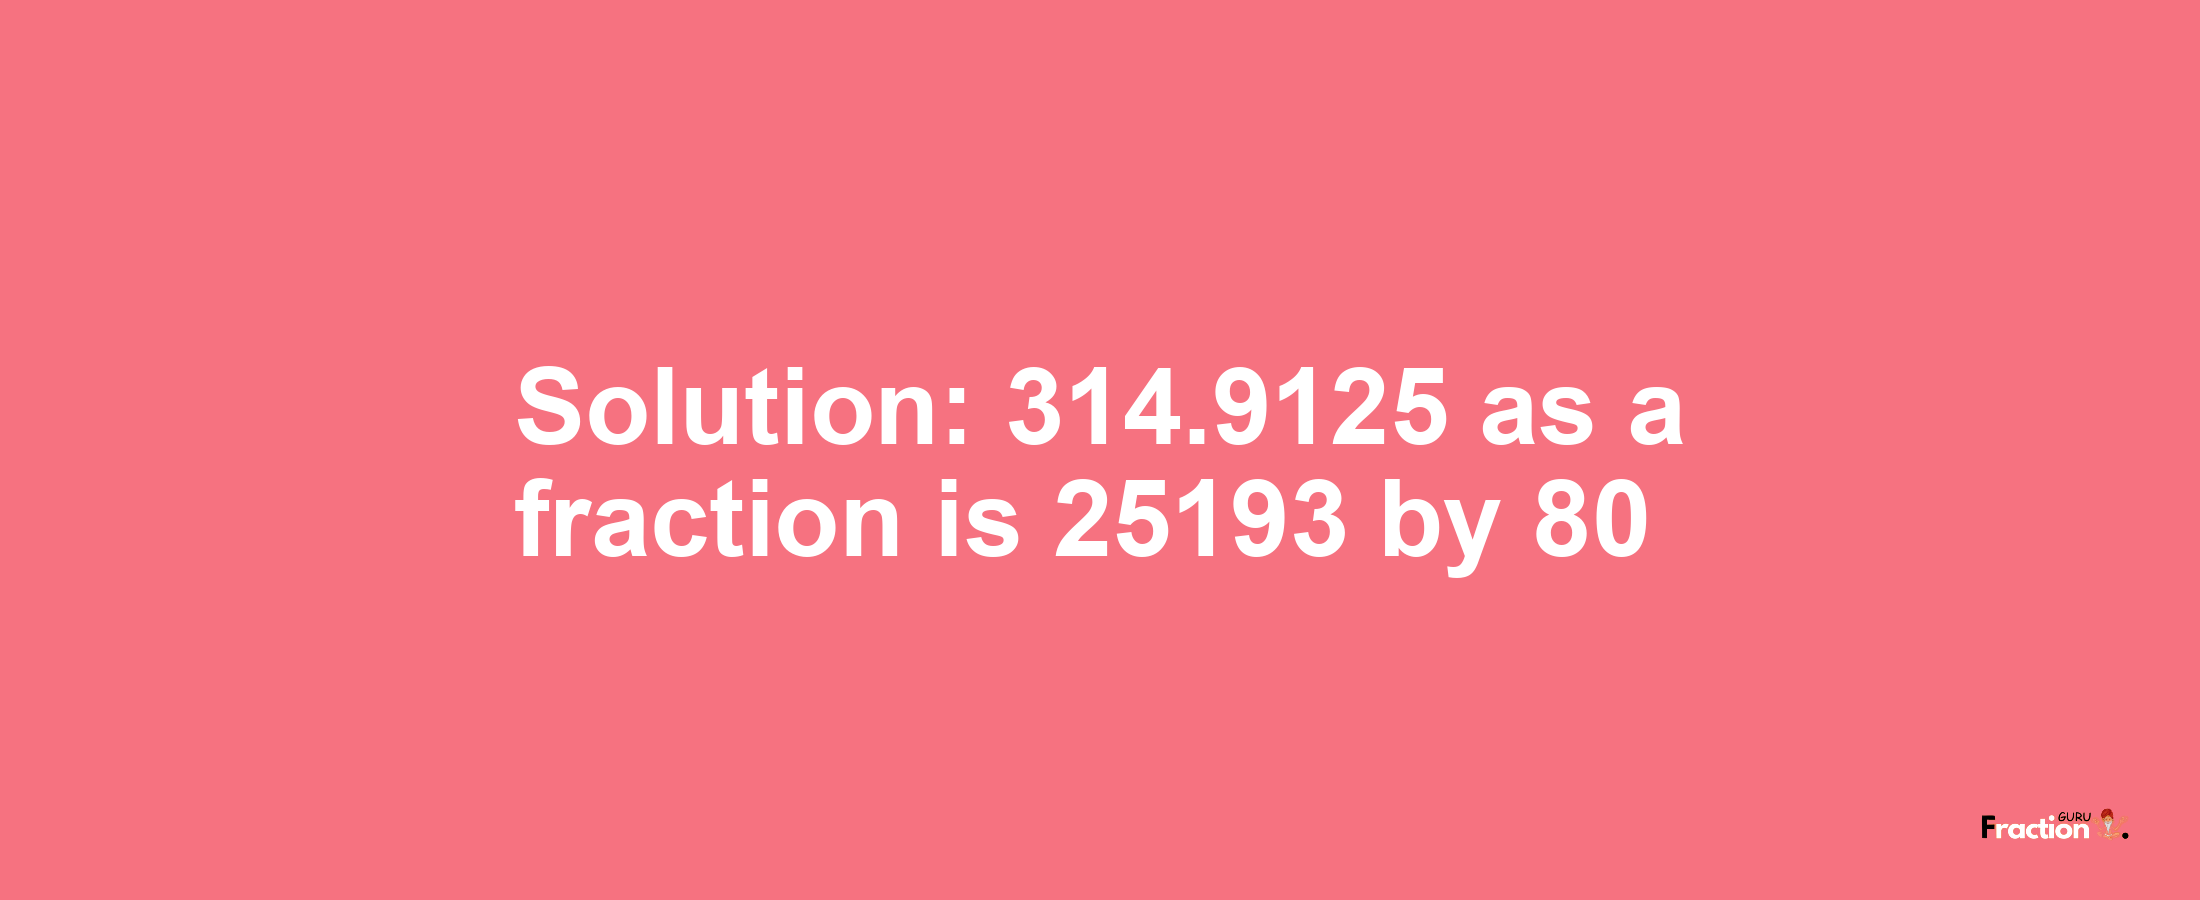 Solution:314.9125 as a fraction is 25193/80